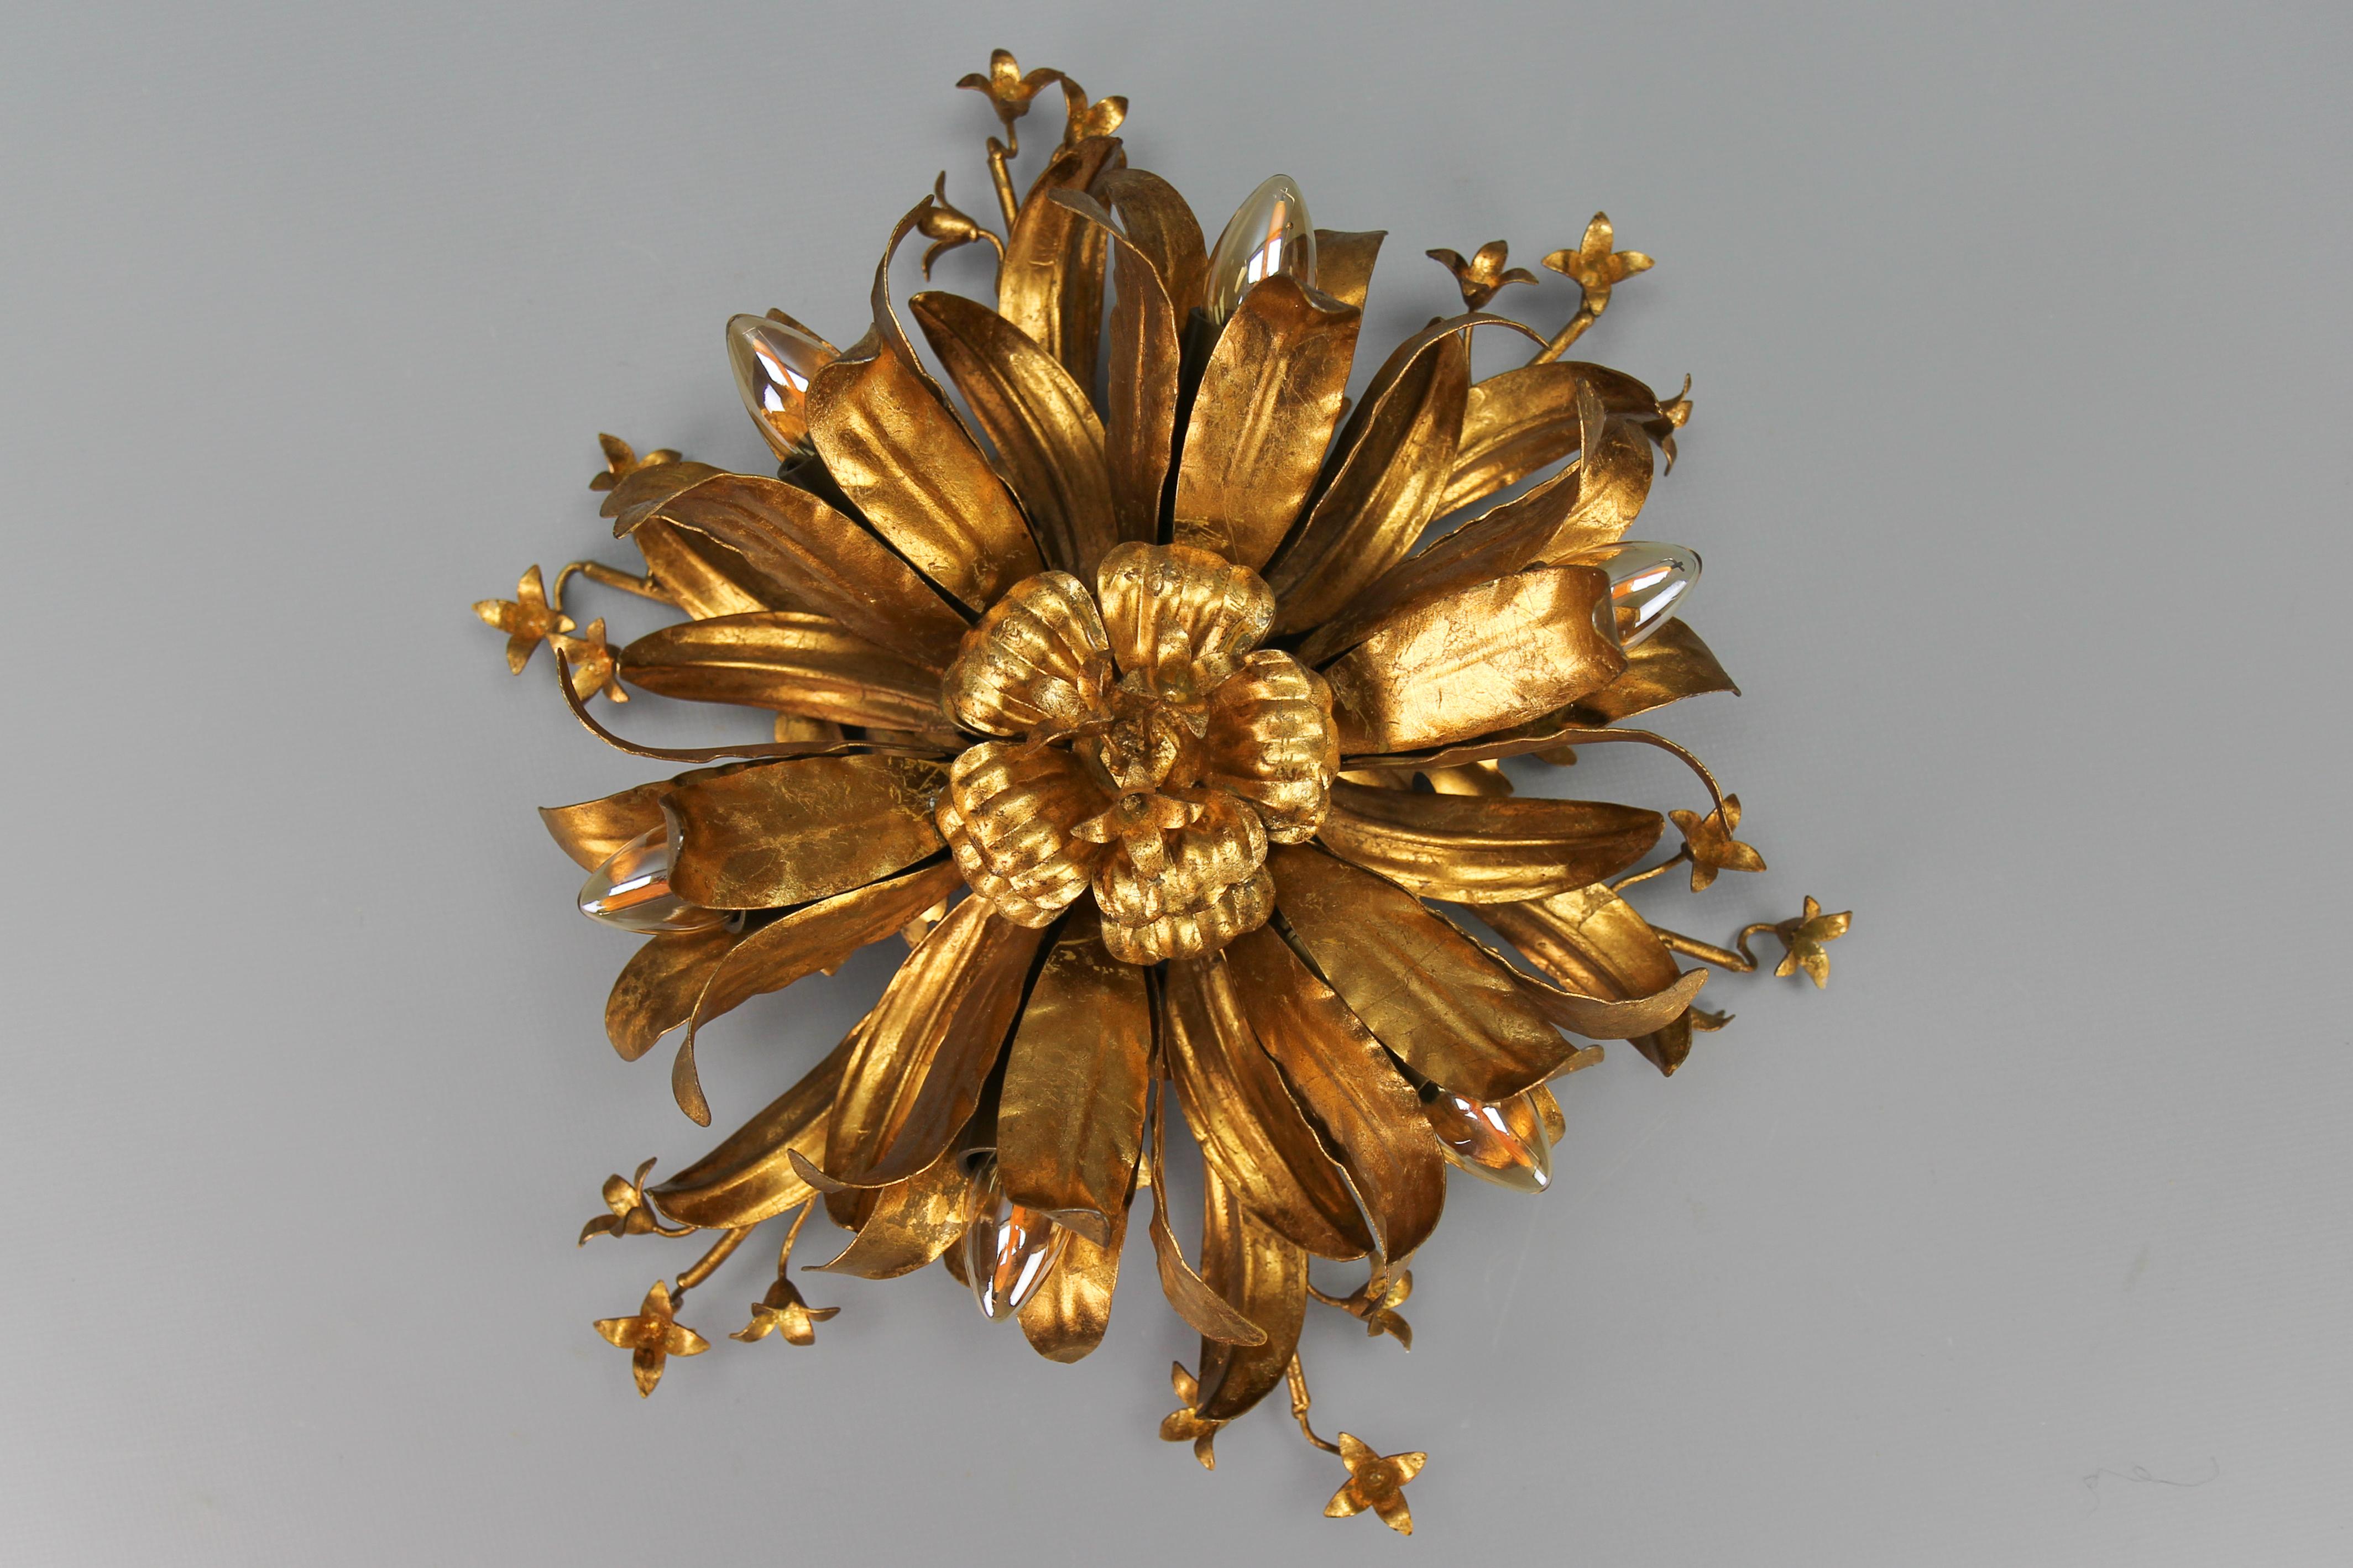 Hollywood Regency style gilt metal flower-shaped ceiling light by Hans Kögl, circa the 1970s.
Adorable Hollywood Regency style gilt metal flower-shaped six-light ceiling lamp, adorned with beautifully shaped leaves and flowers.
Six sockets for